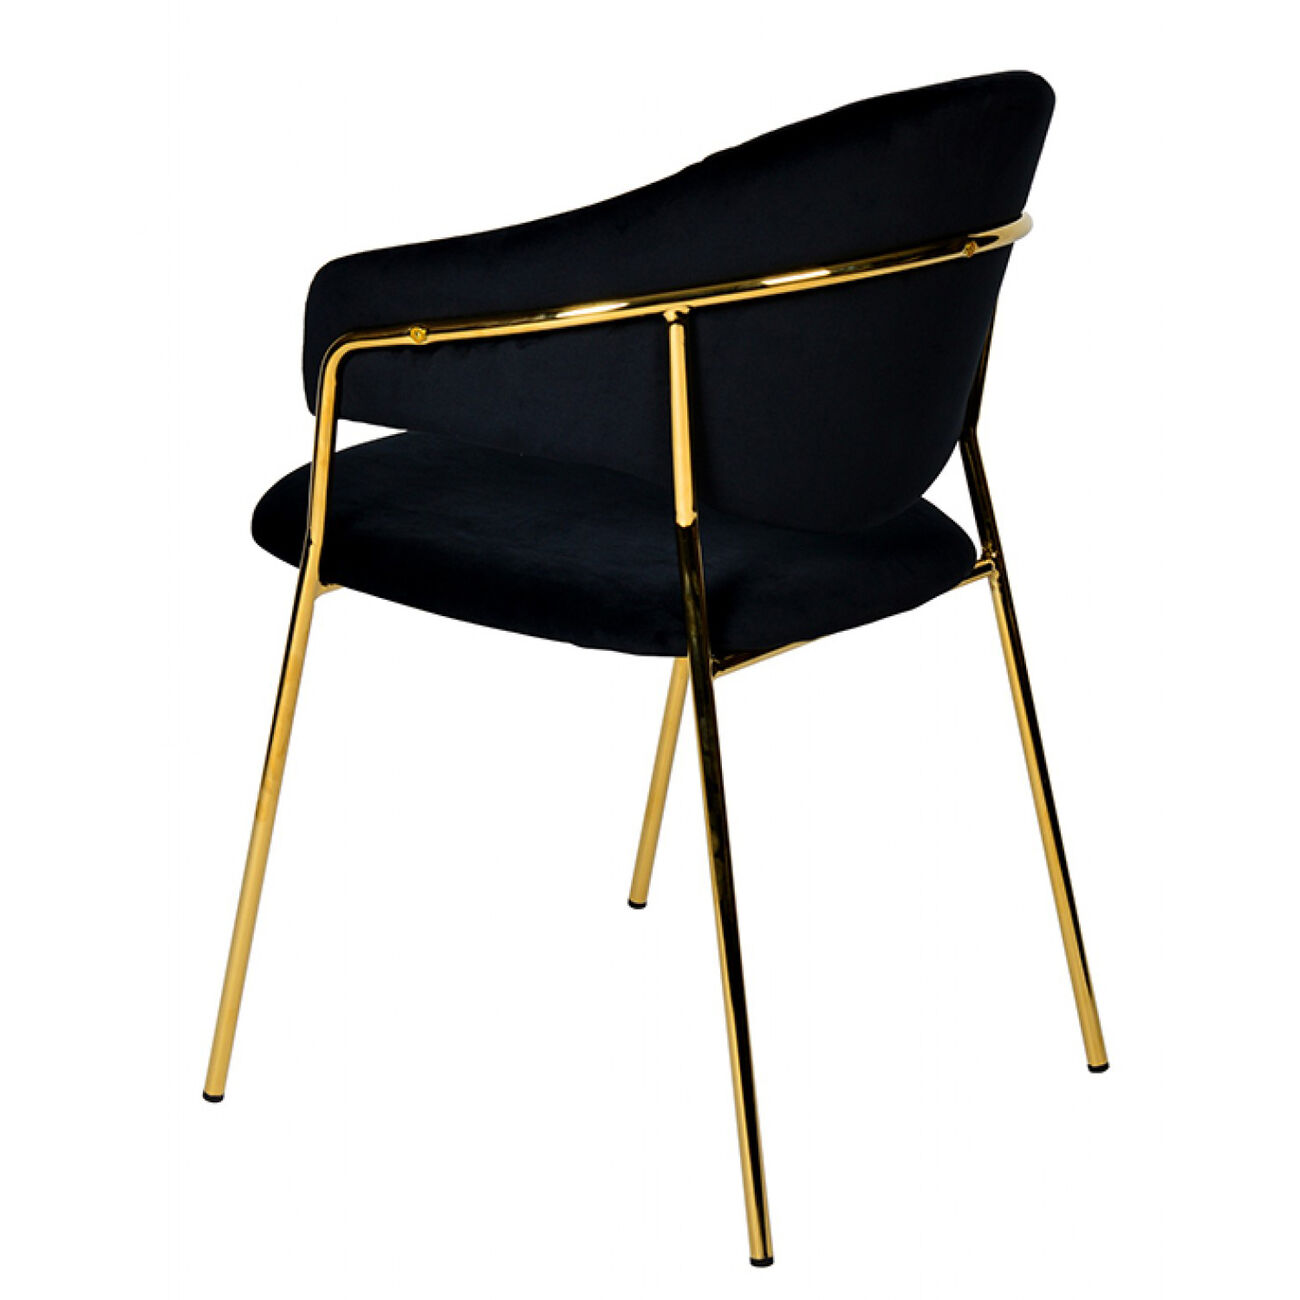 Fabric Upholstered Dining Chair with Metal Legs, Set of 2, Black and Gold